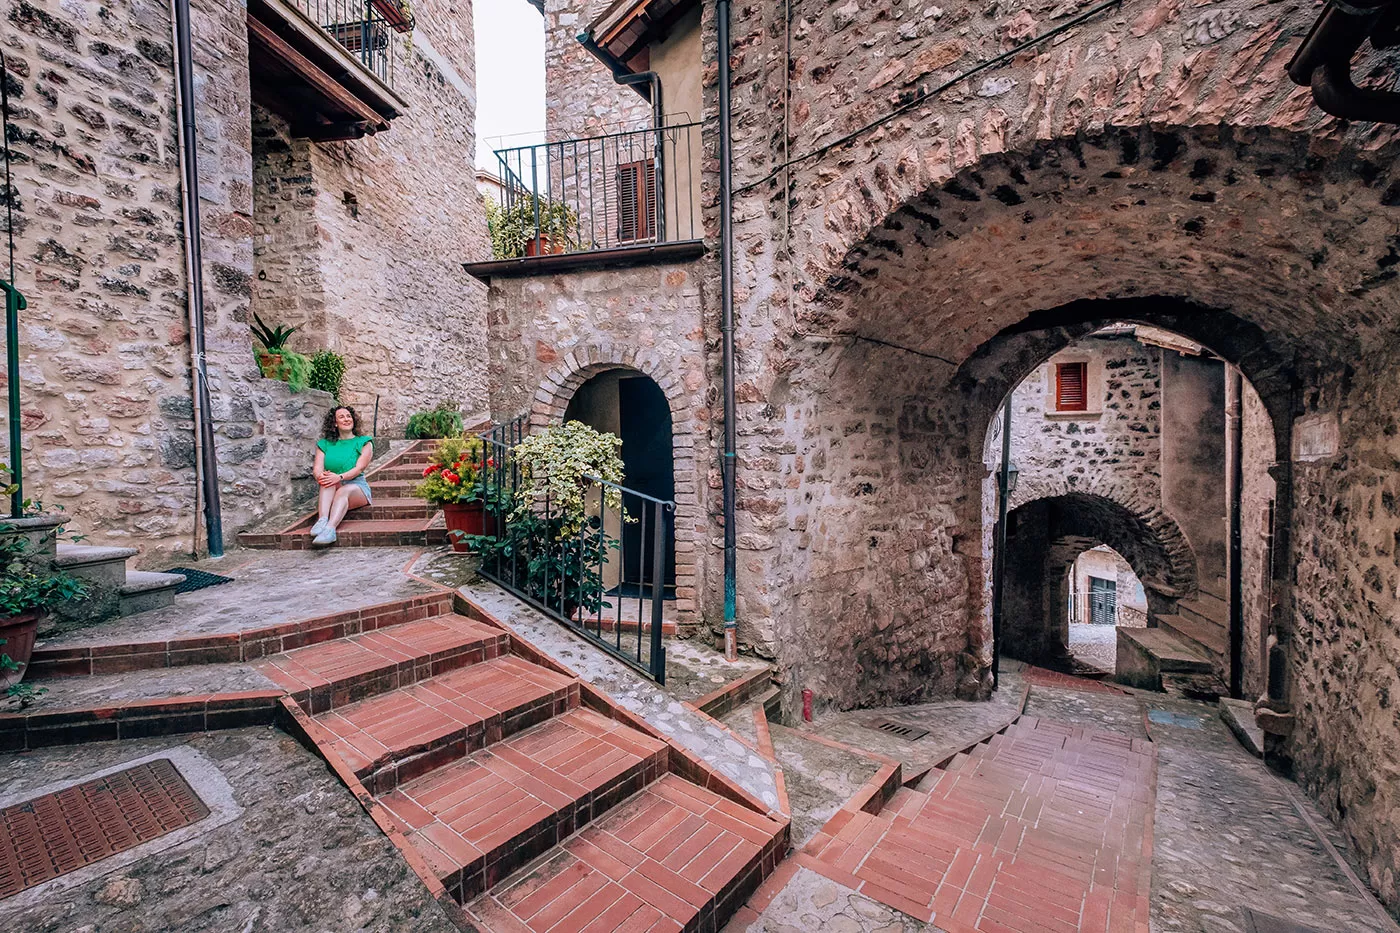 Things to do in Umbria Italy - Scheggino alley and arches